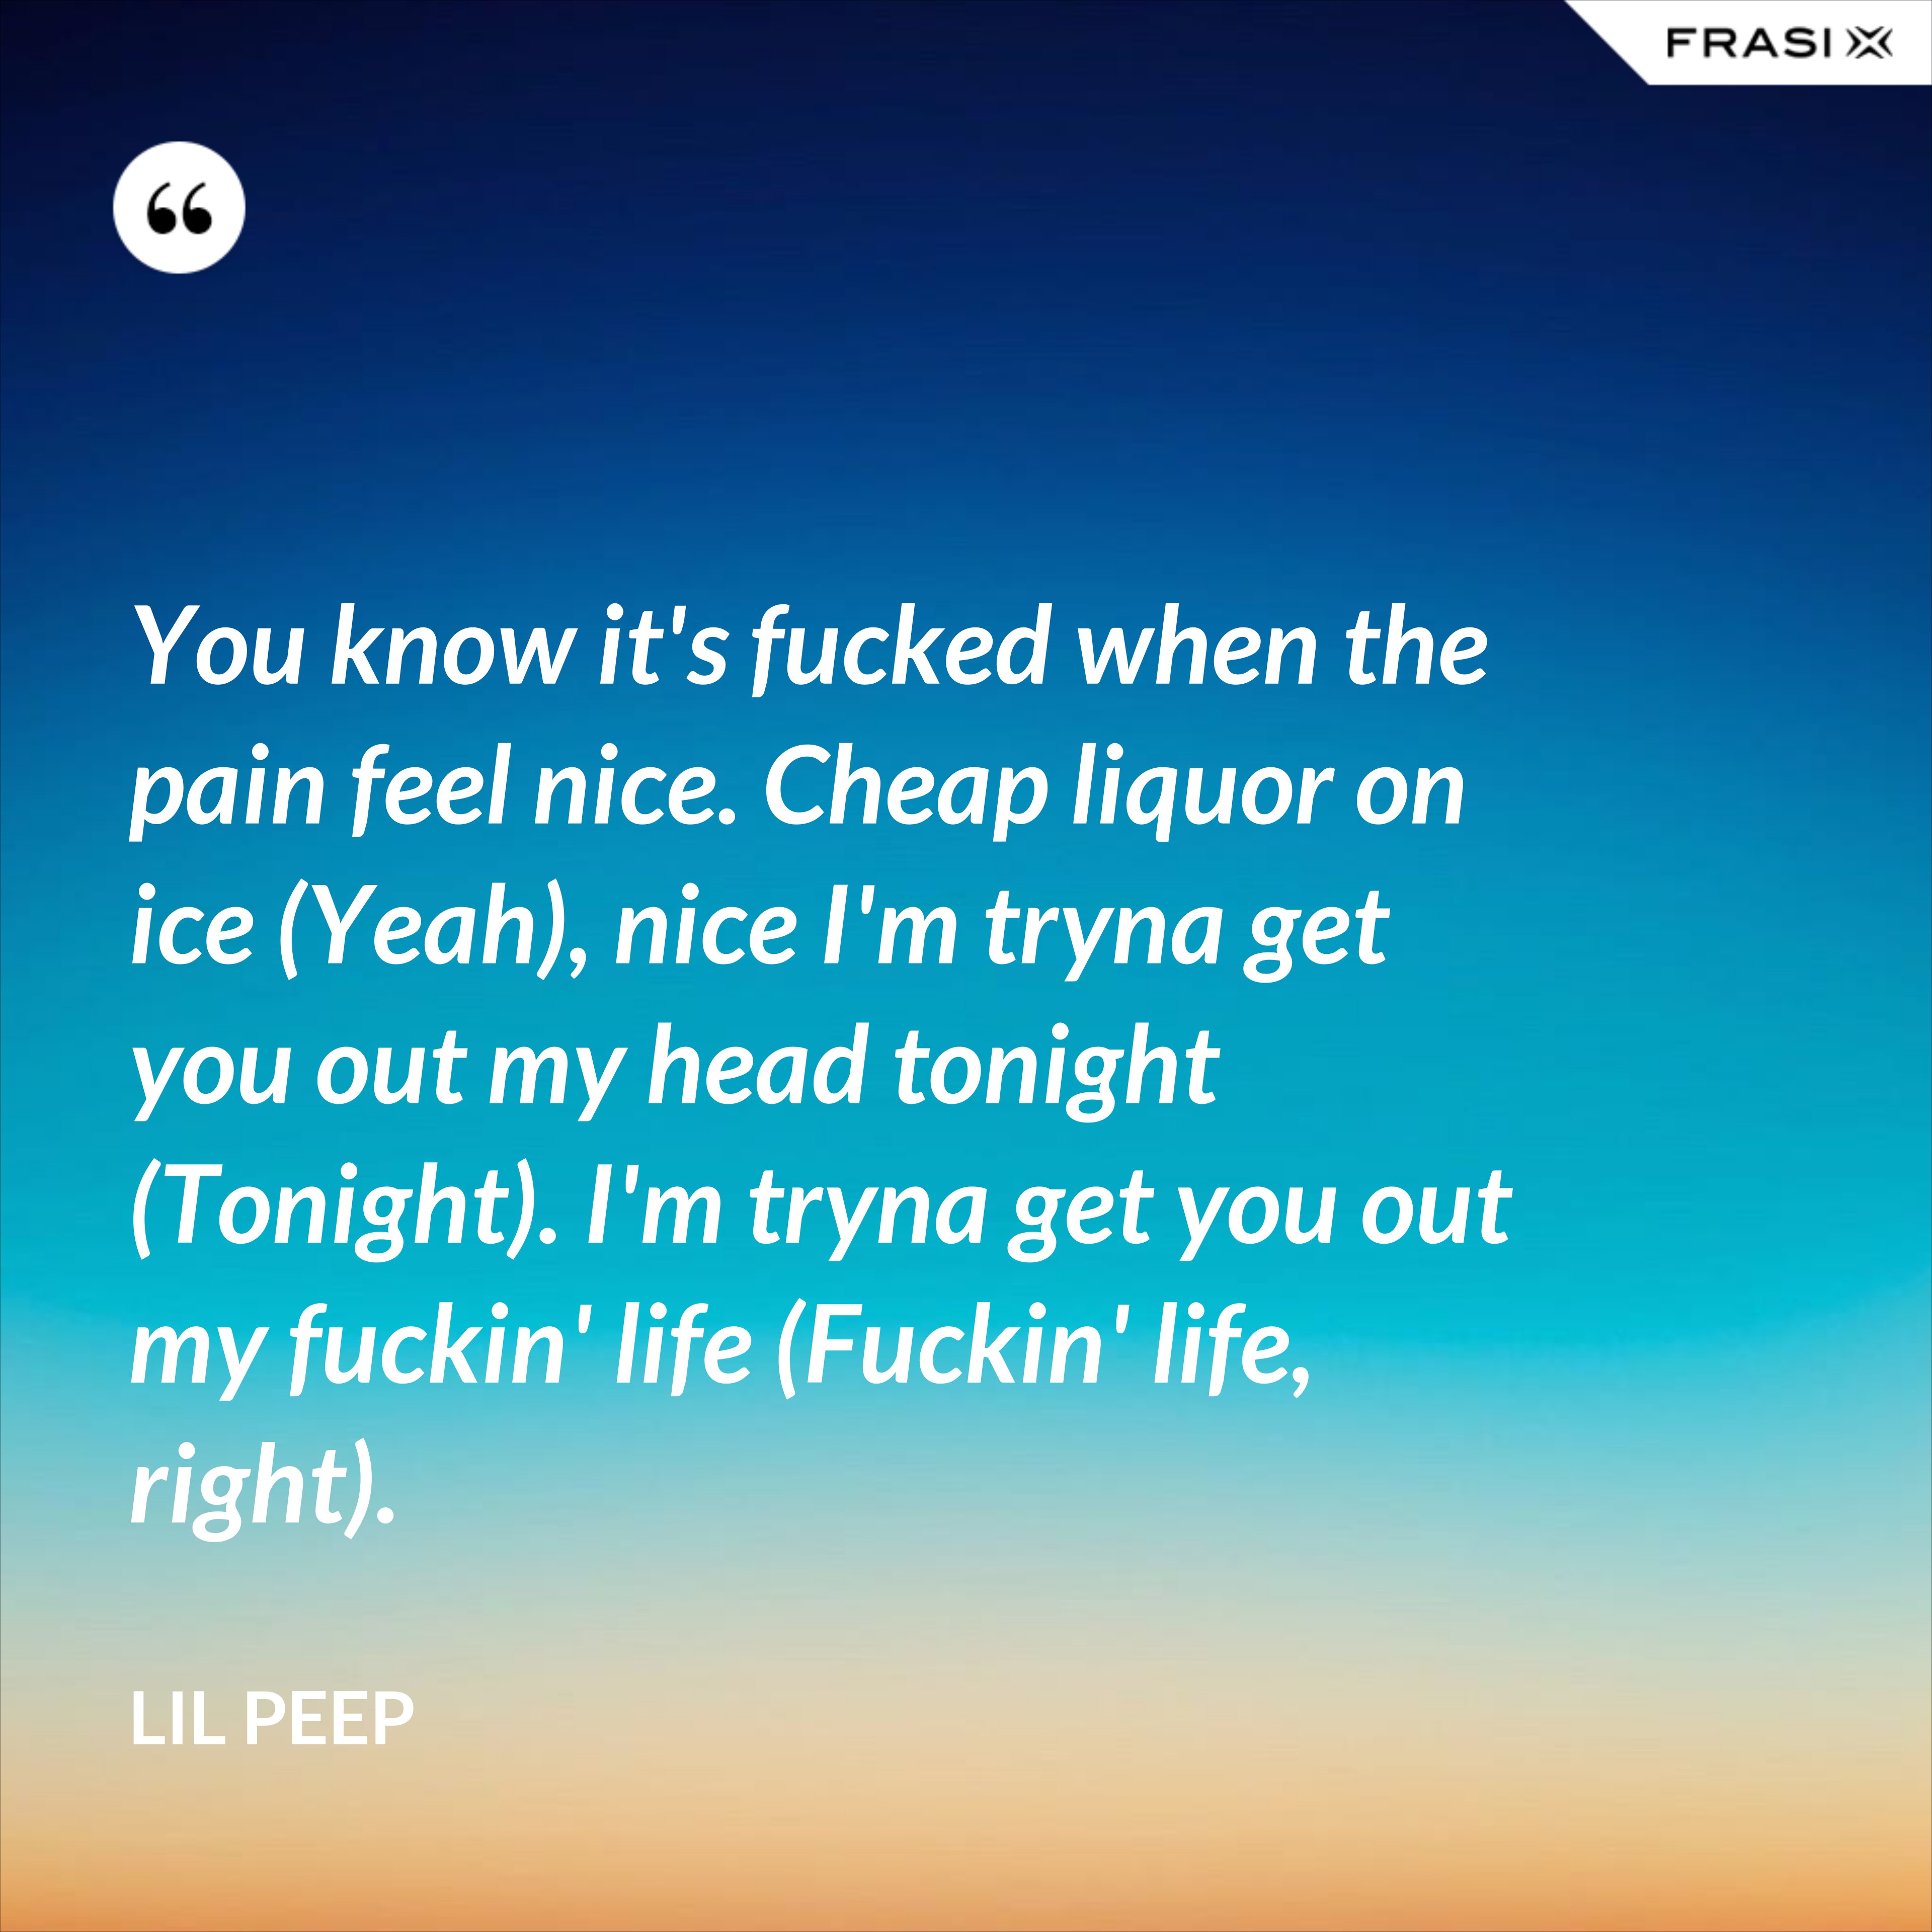 You know it's fucked when the pain feel nice. Cheap liquor on ice (Yeah), nice I'm tryna get you out my head tonight (Tonight). I'm tryna get you out my fuckin' life (Fuckin' life, right). - Lil Peep